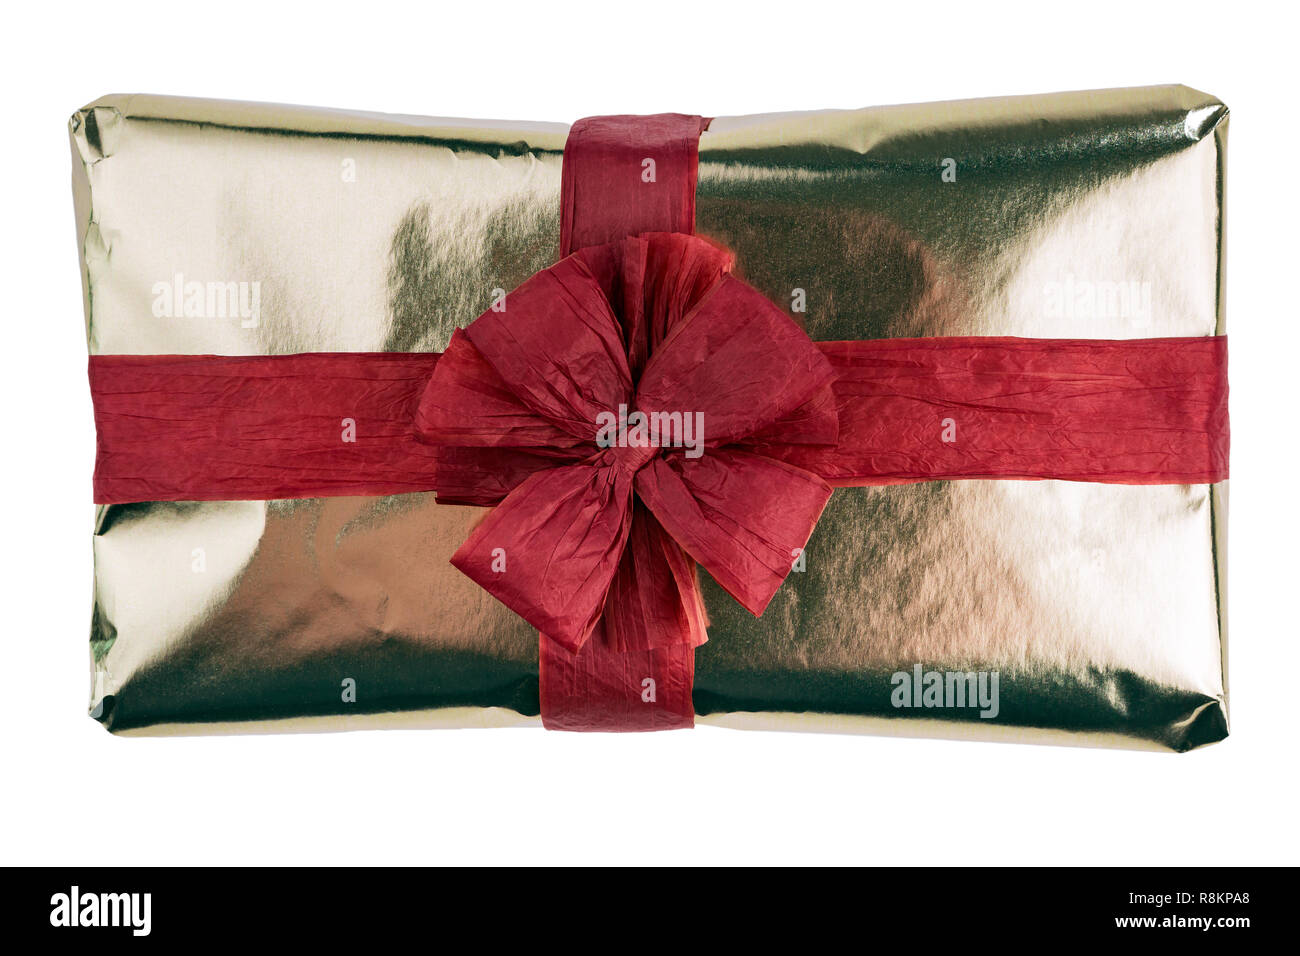 Gift box wrapped in gold wrapping paper, decorated with red raffia ribbon  and bow isolated on the white background Stock Photo - Alamy